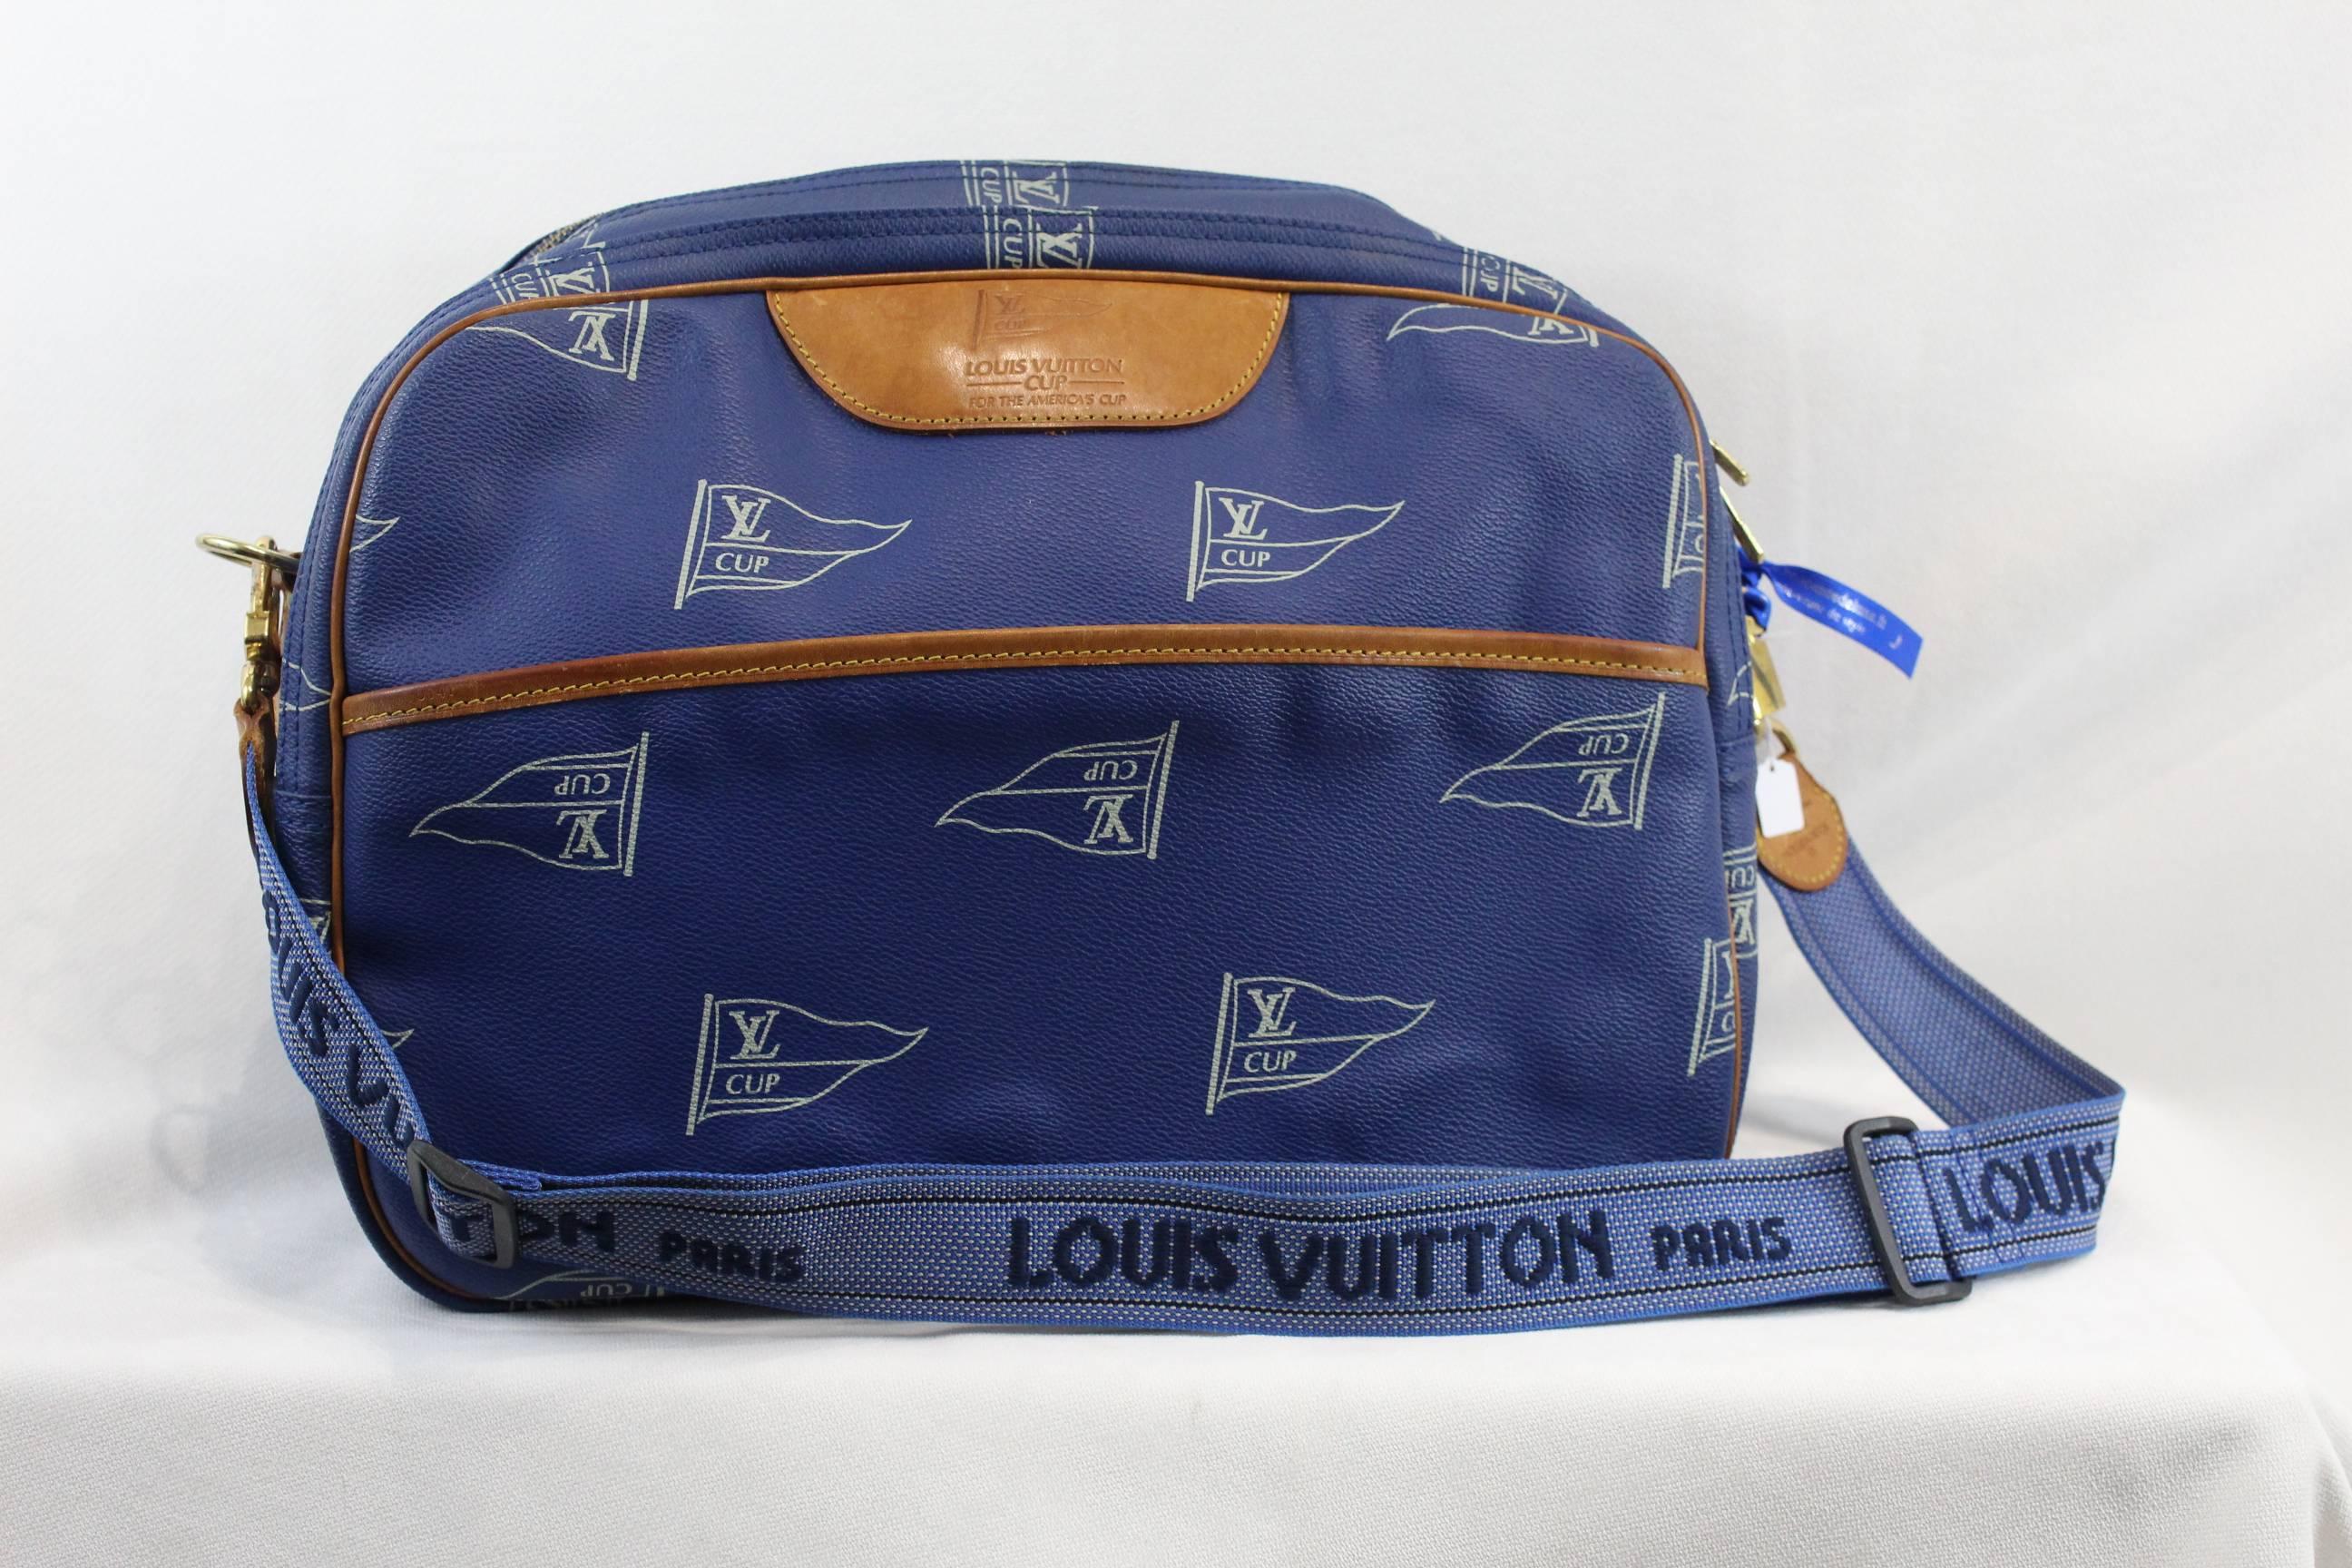 Really nice and rare Louis Vuitton bag made for the LV Cup.

Good condition but the bag presents some signs of wear. 
Lining start to come off.

Sold with one padlock and key.

Size 14x13" 